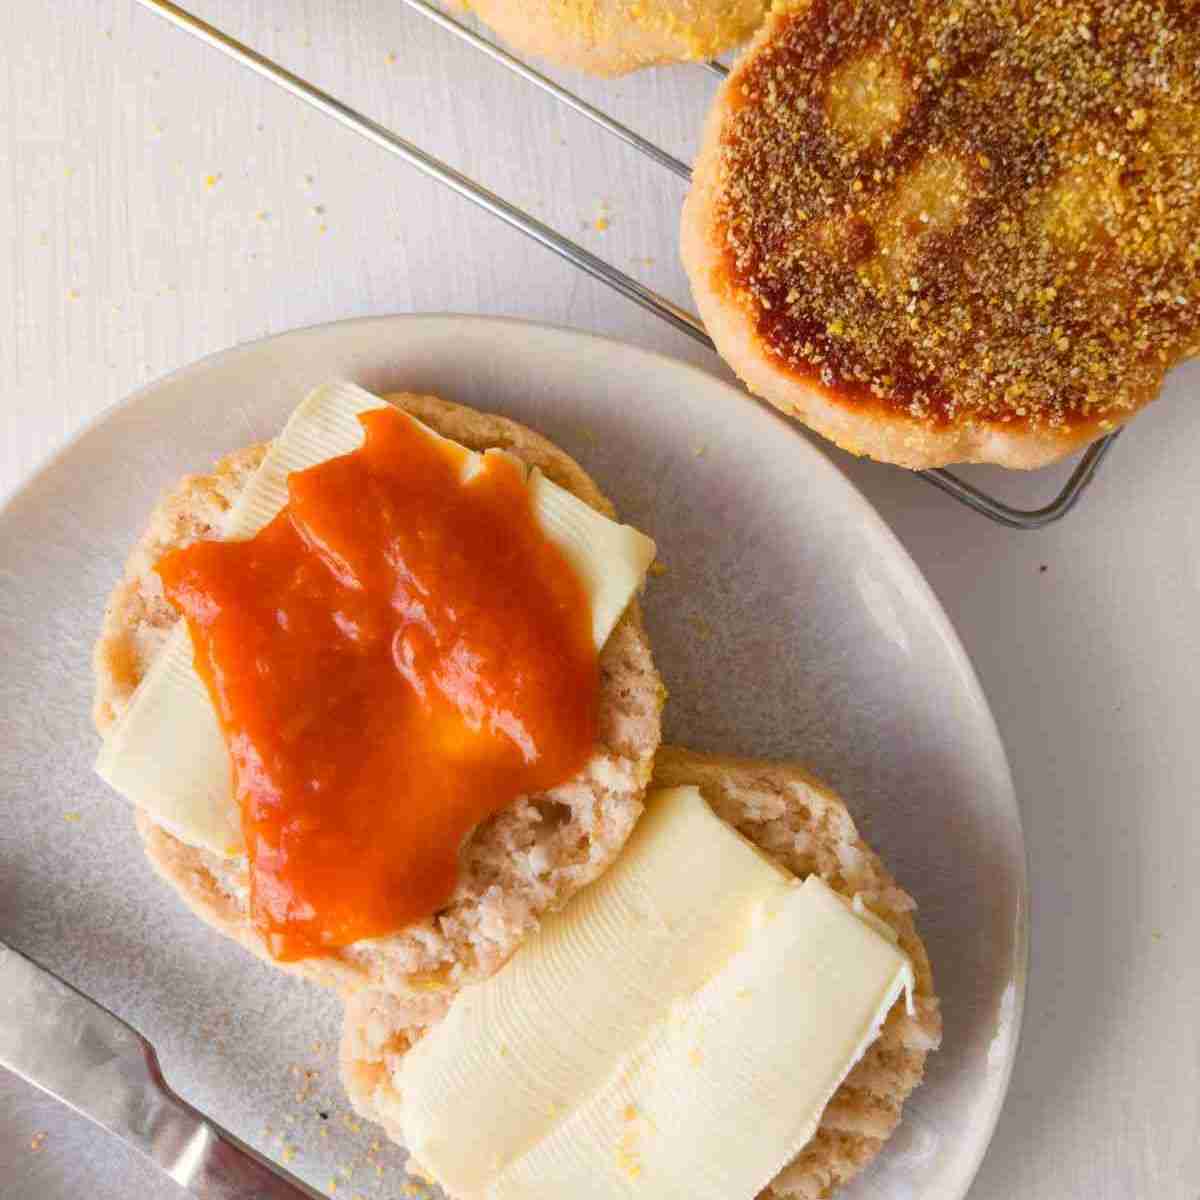 Gluten-free sourdough English muffin cut in half on a plate with butter and jam.